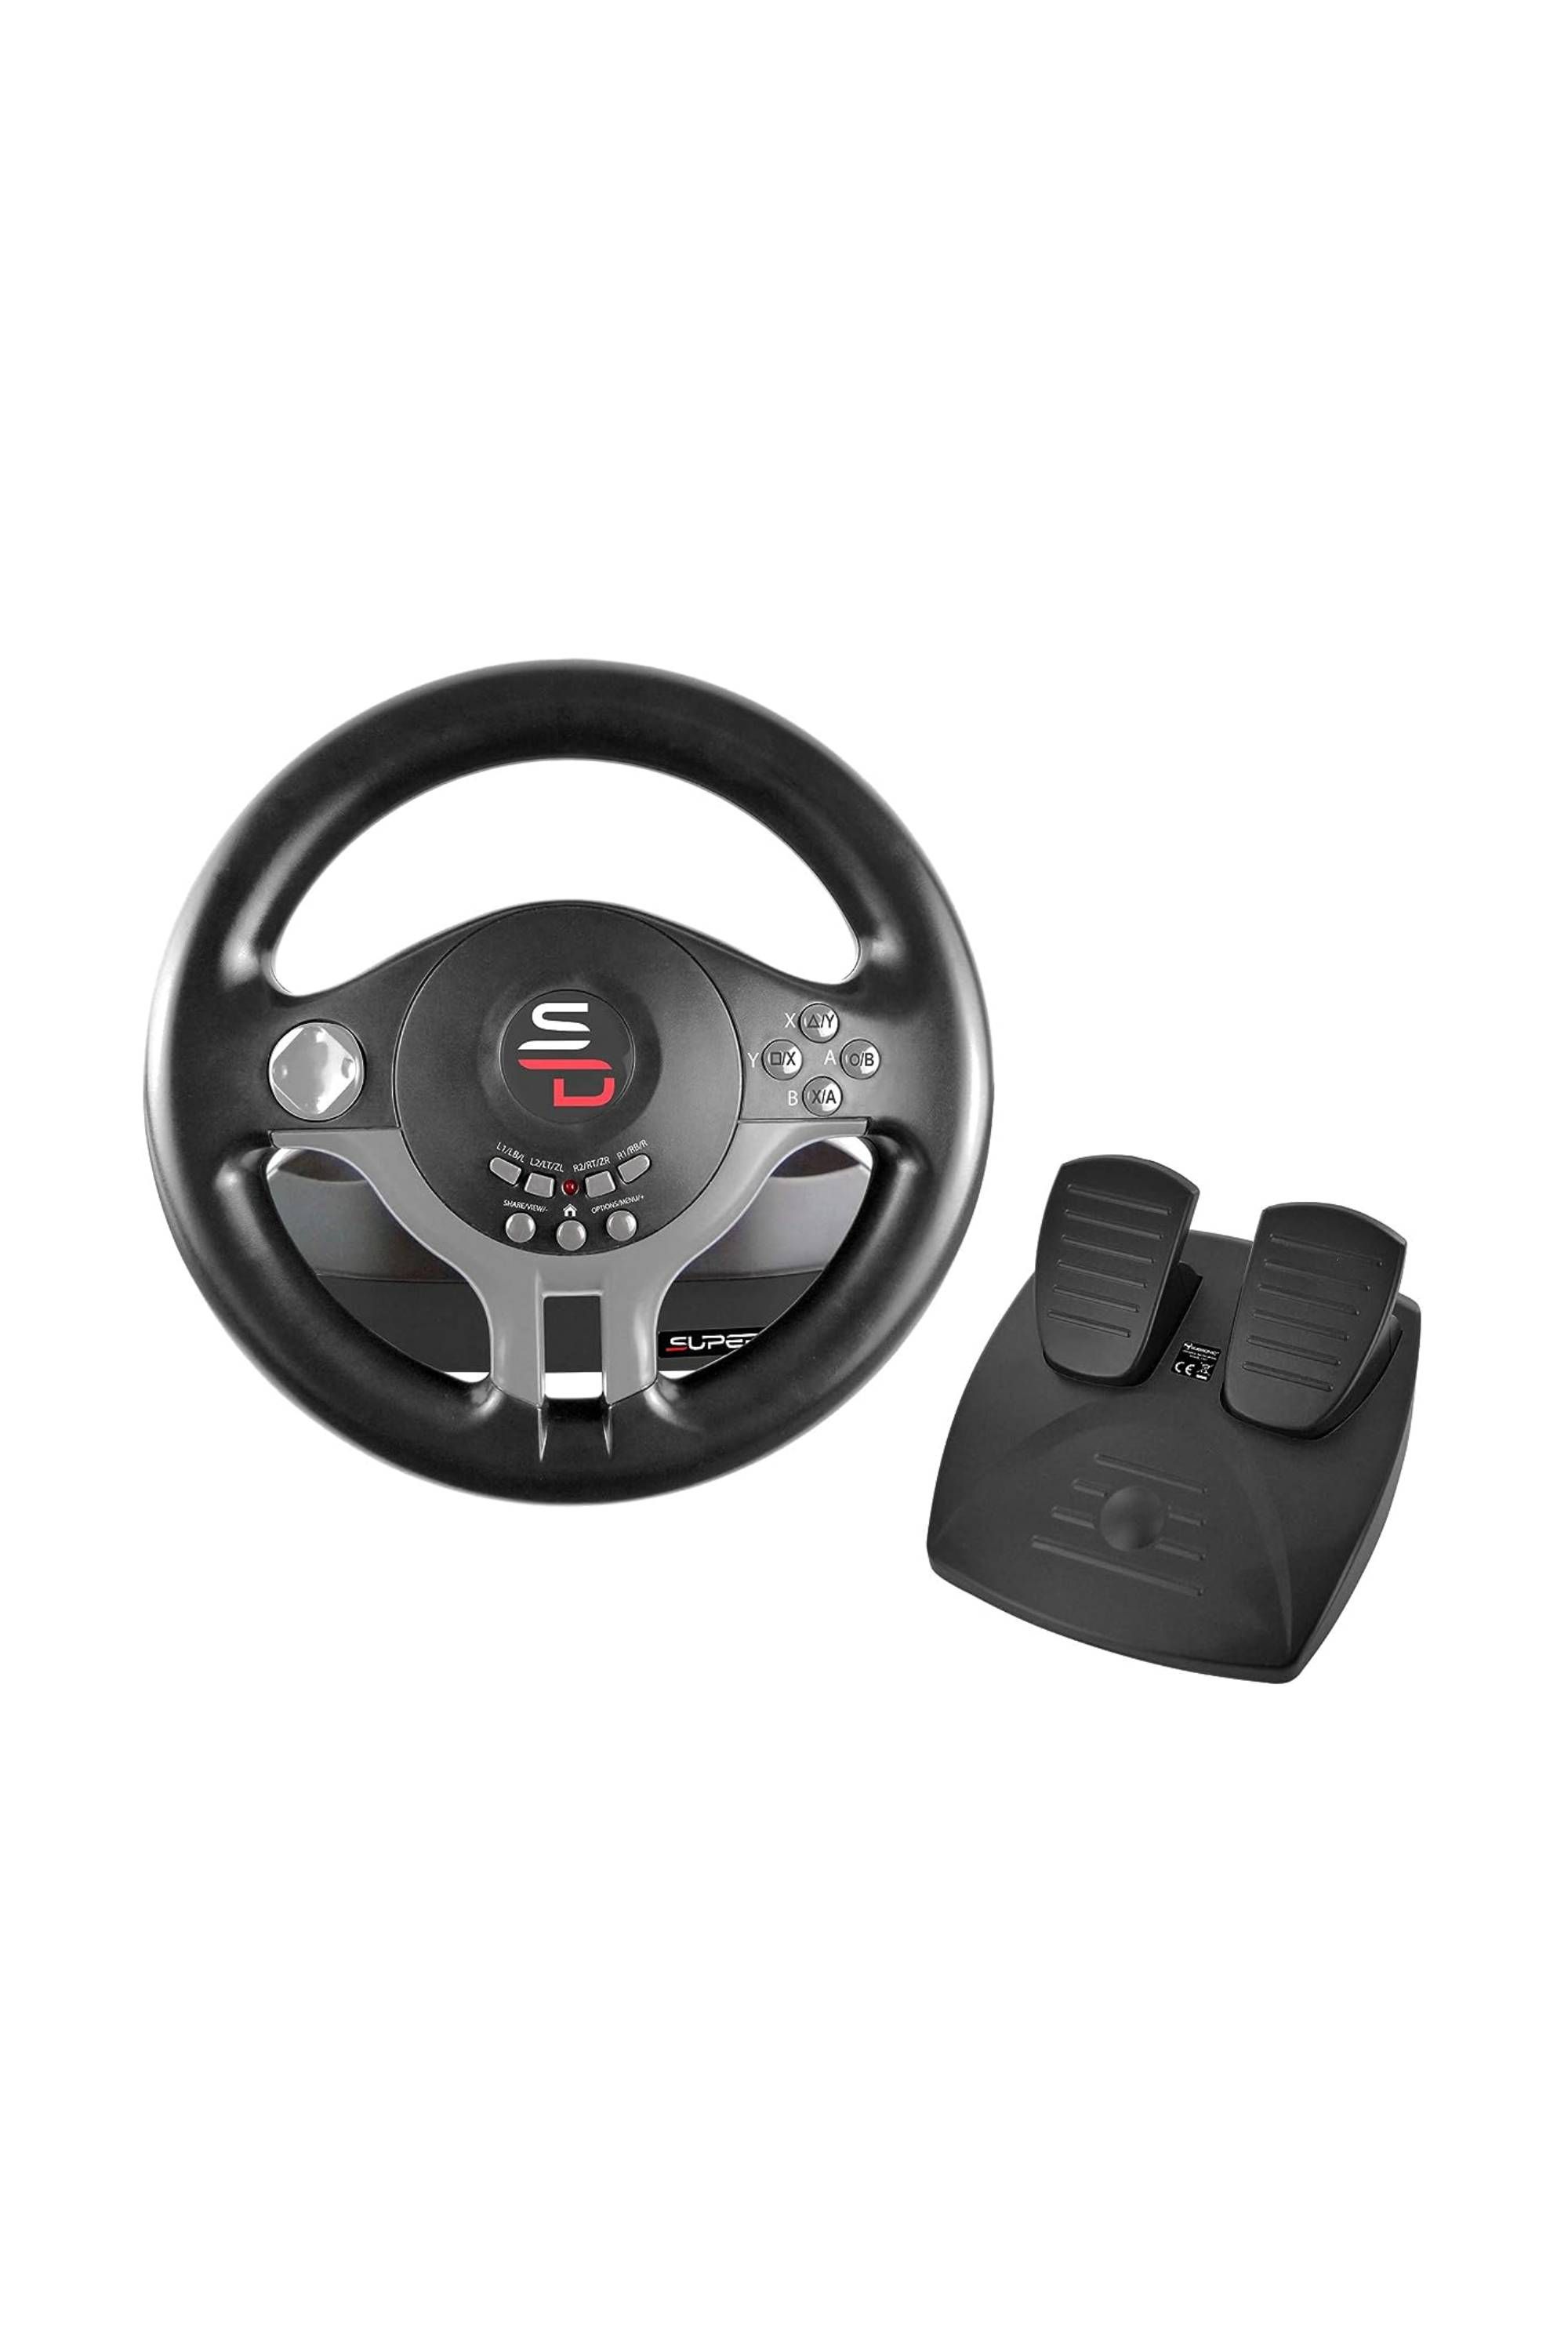 Logitech Launches G923 Racing Wheel With Advanced TrueForce Feedback System  For Sim Fans